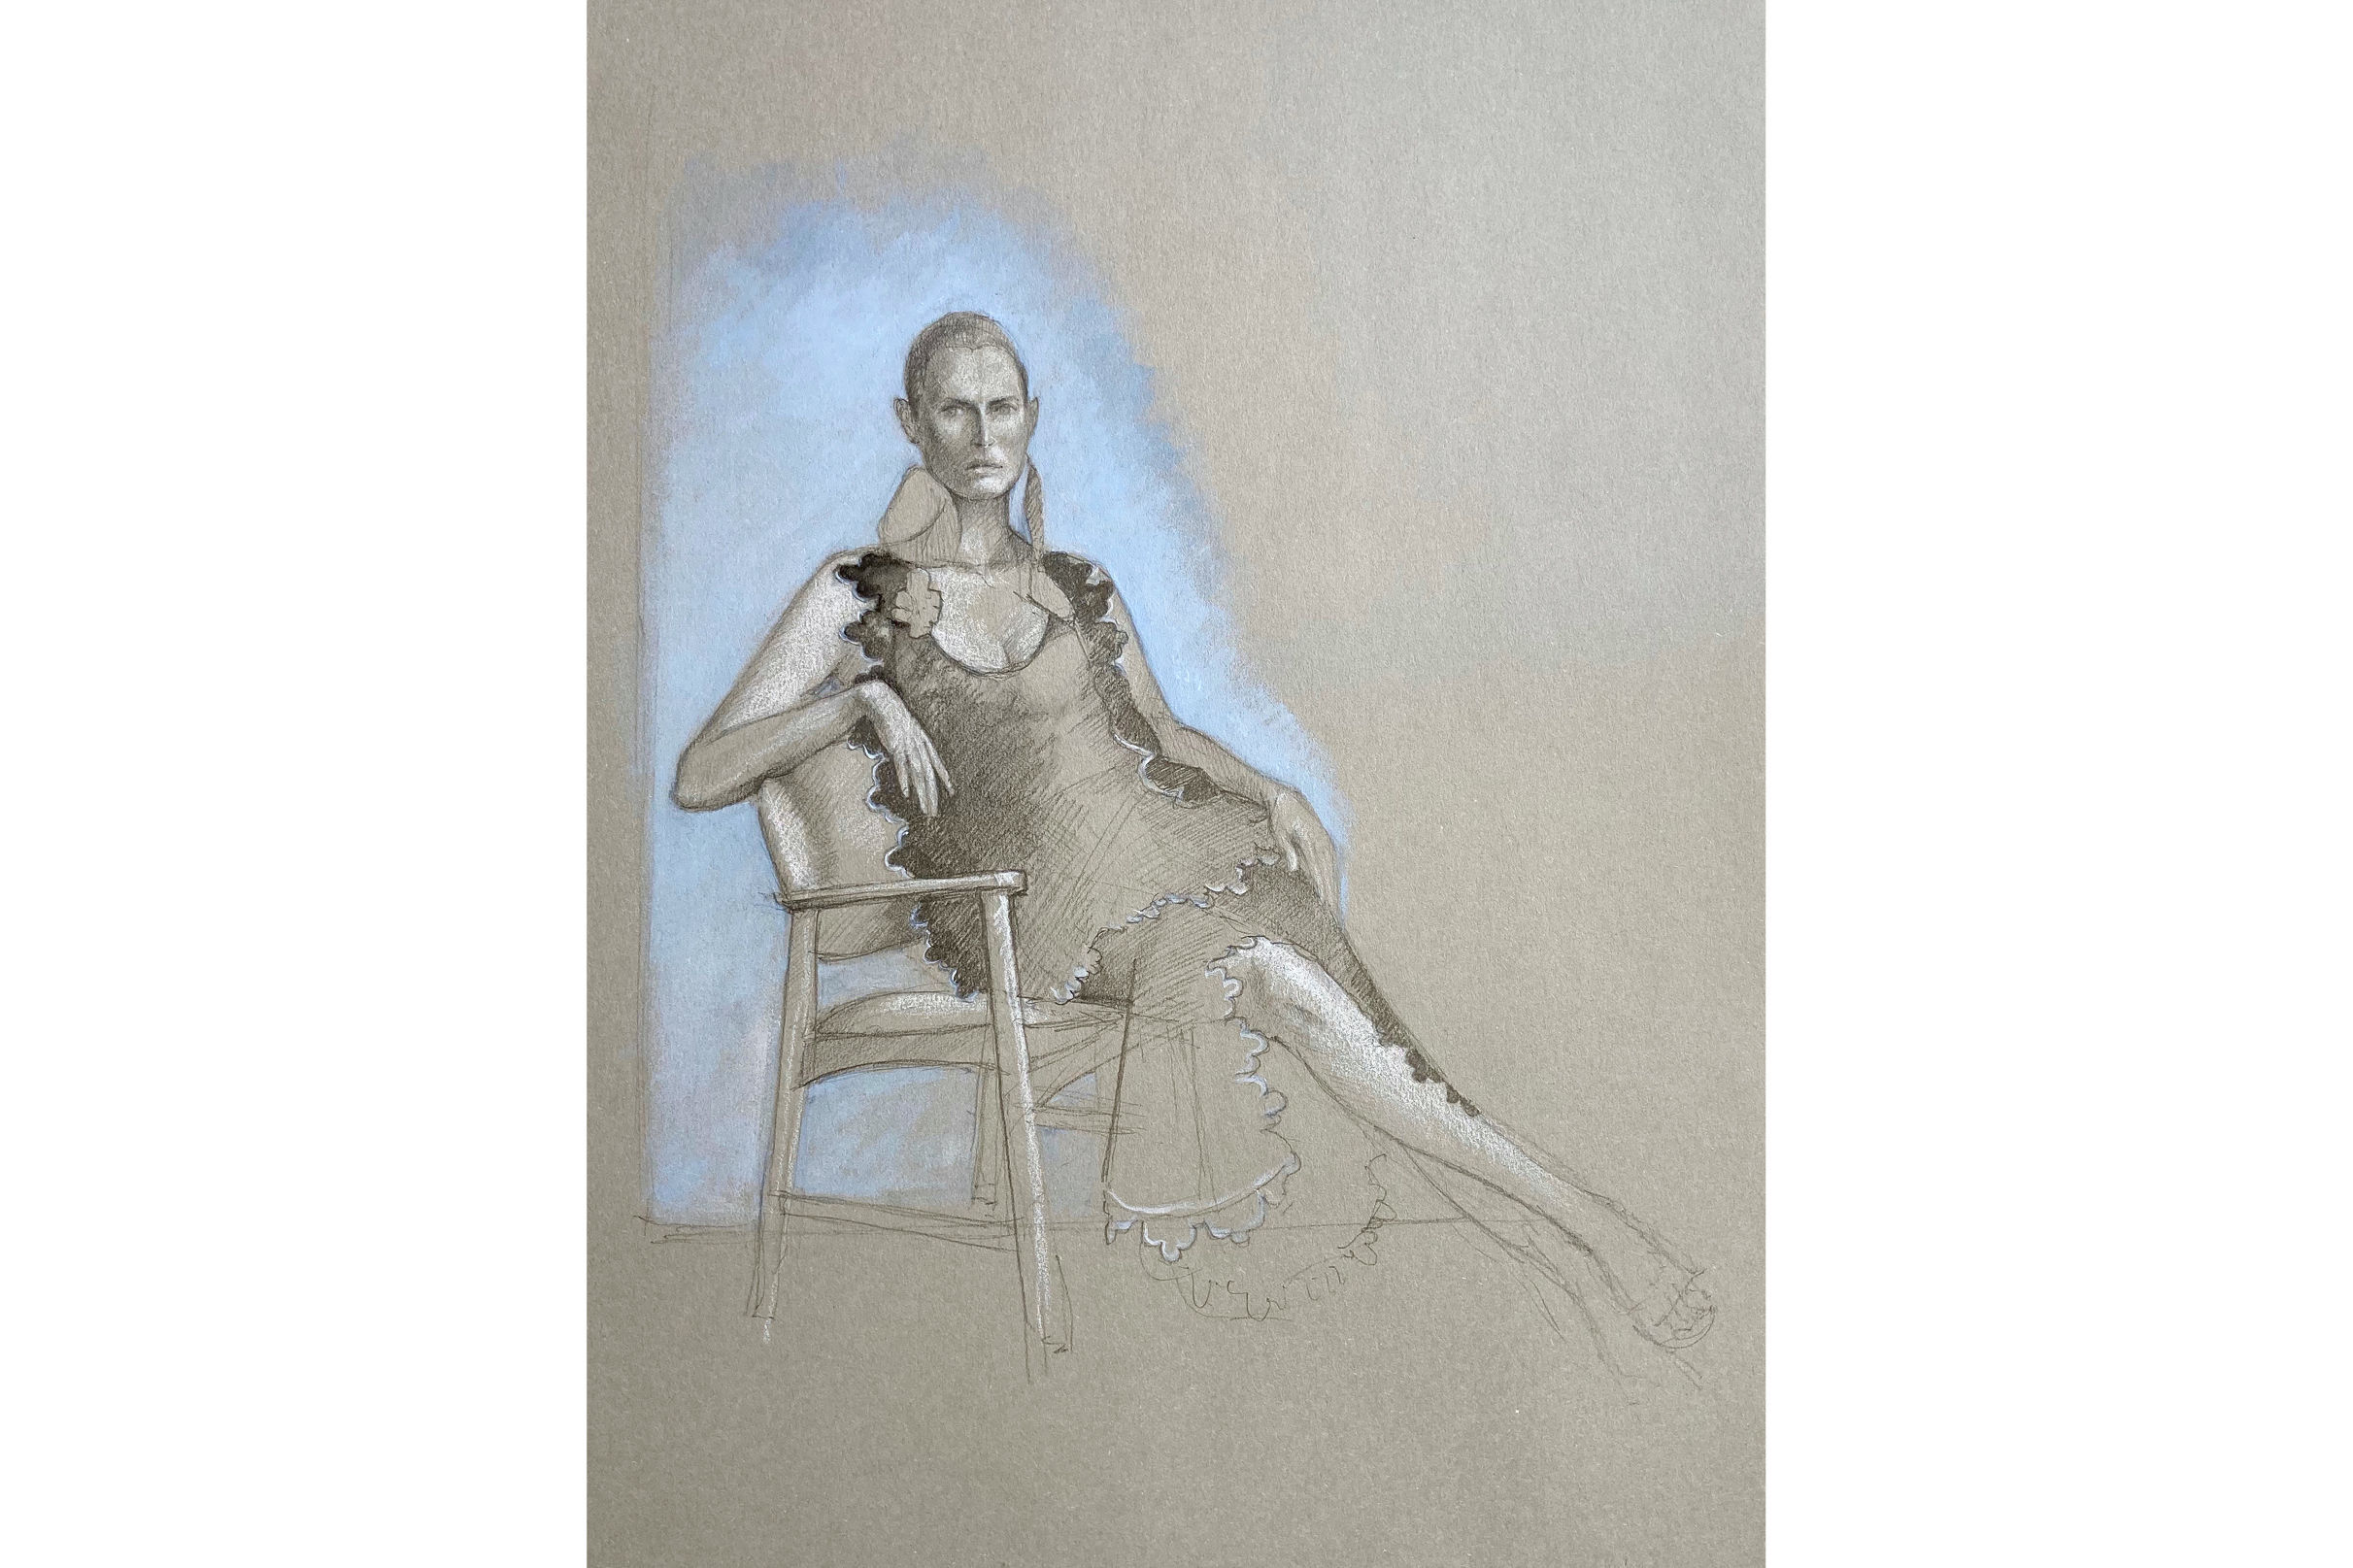 Drawn together by art: Stella x Saatchi Gallery life drawing